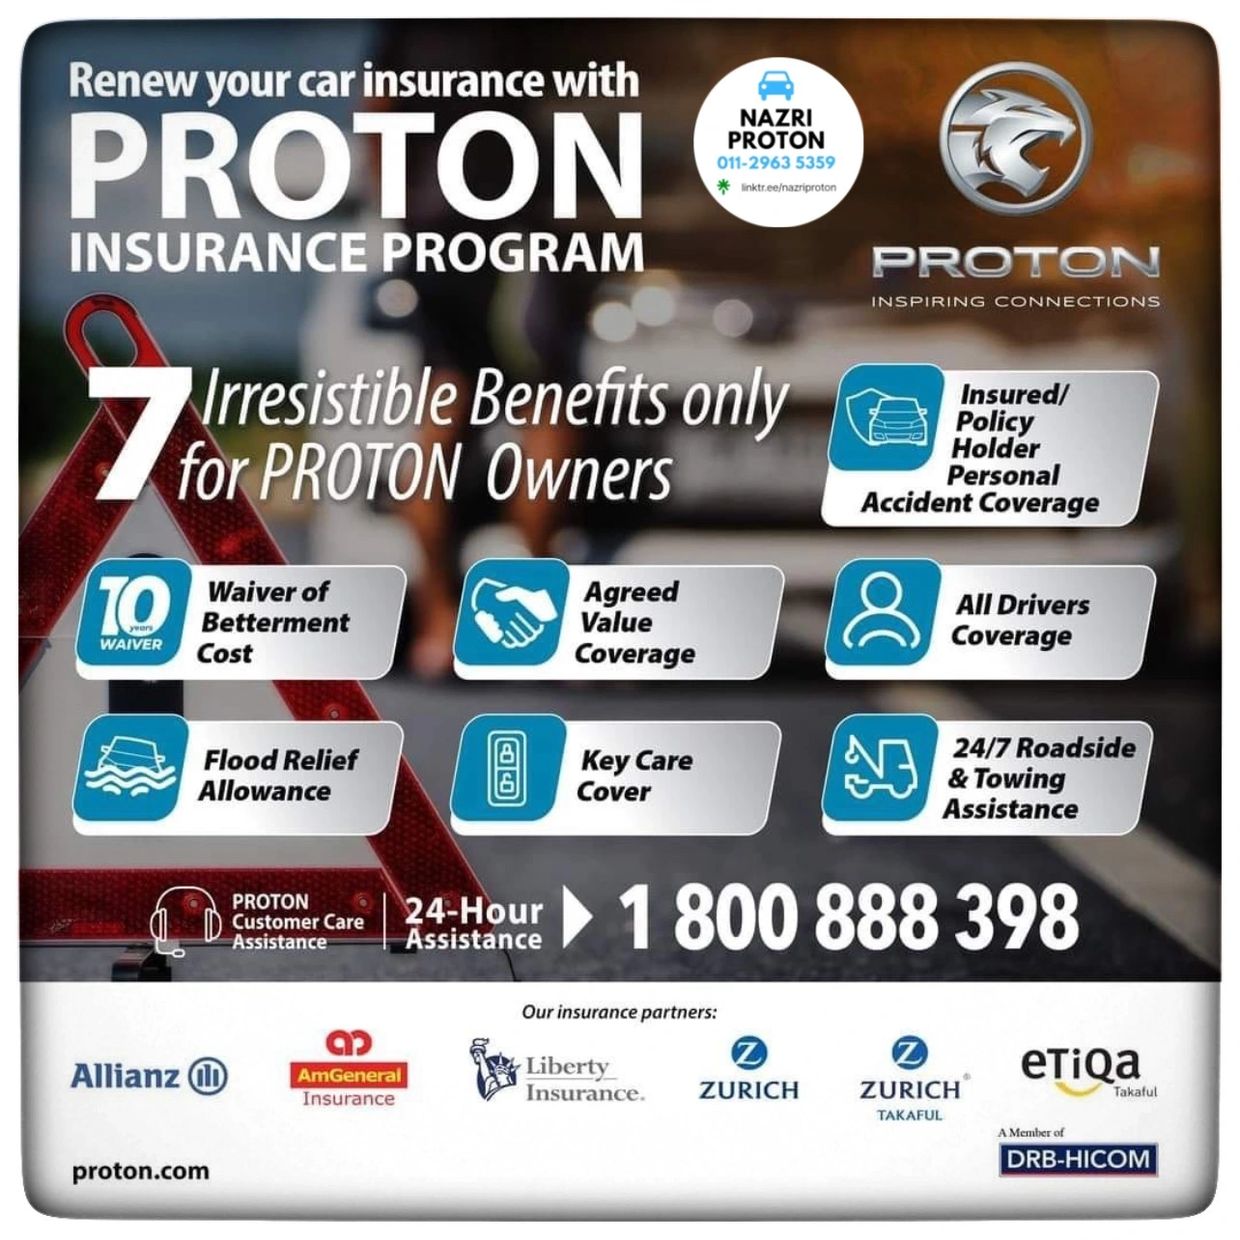 Keep you and your Proton car protected on your daily drive with the PROTON Insurance Program